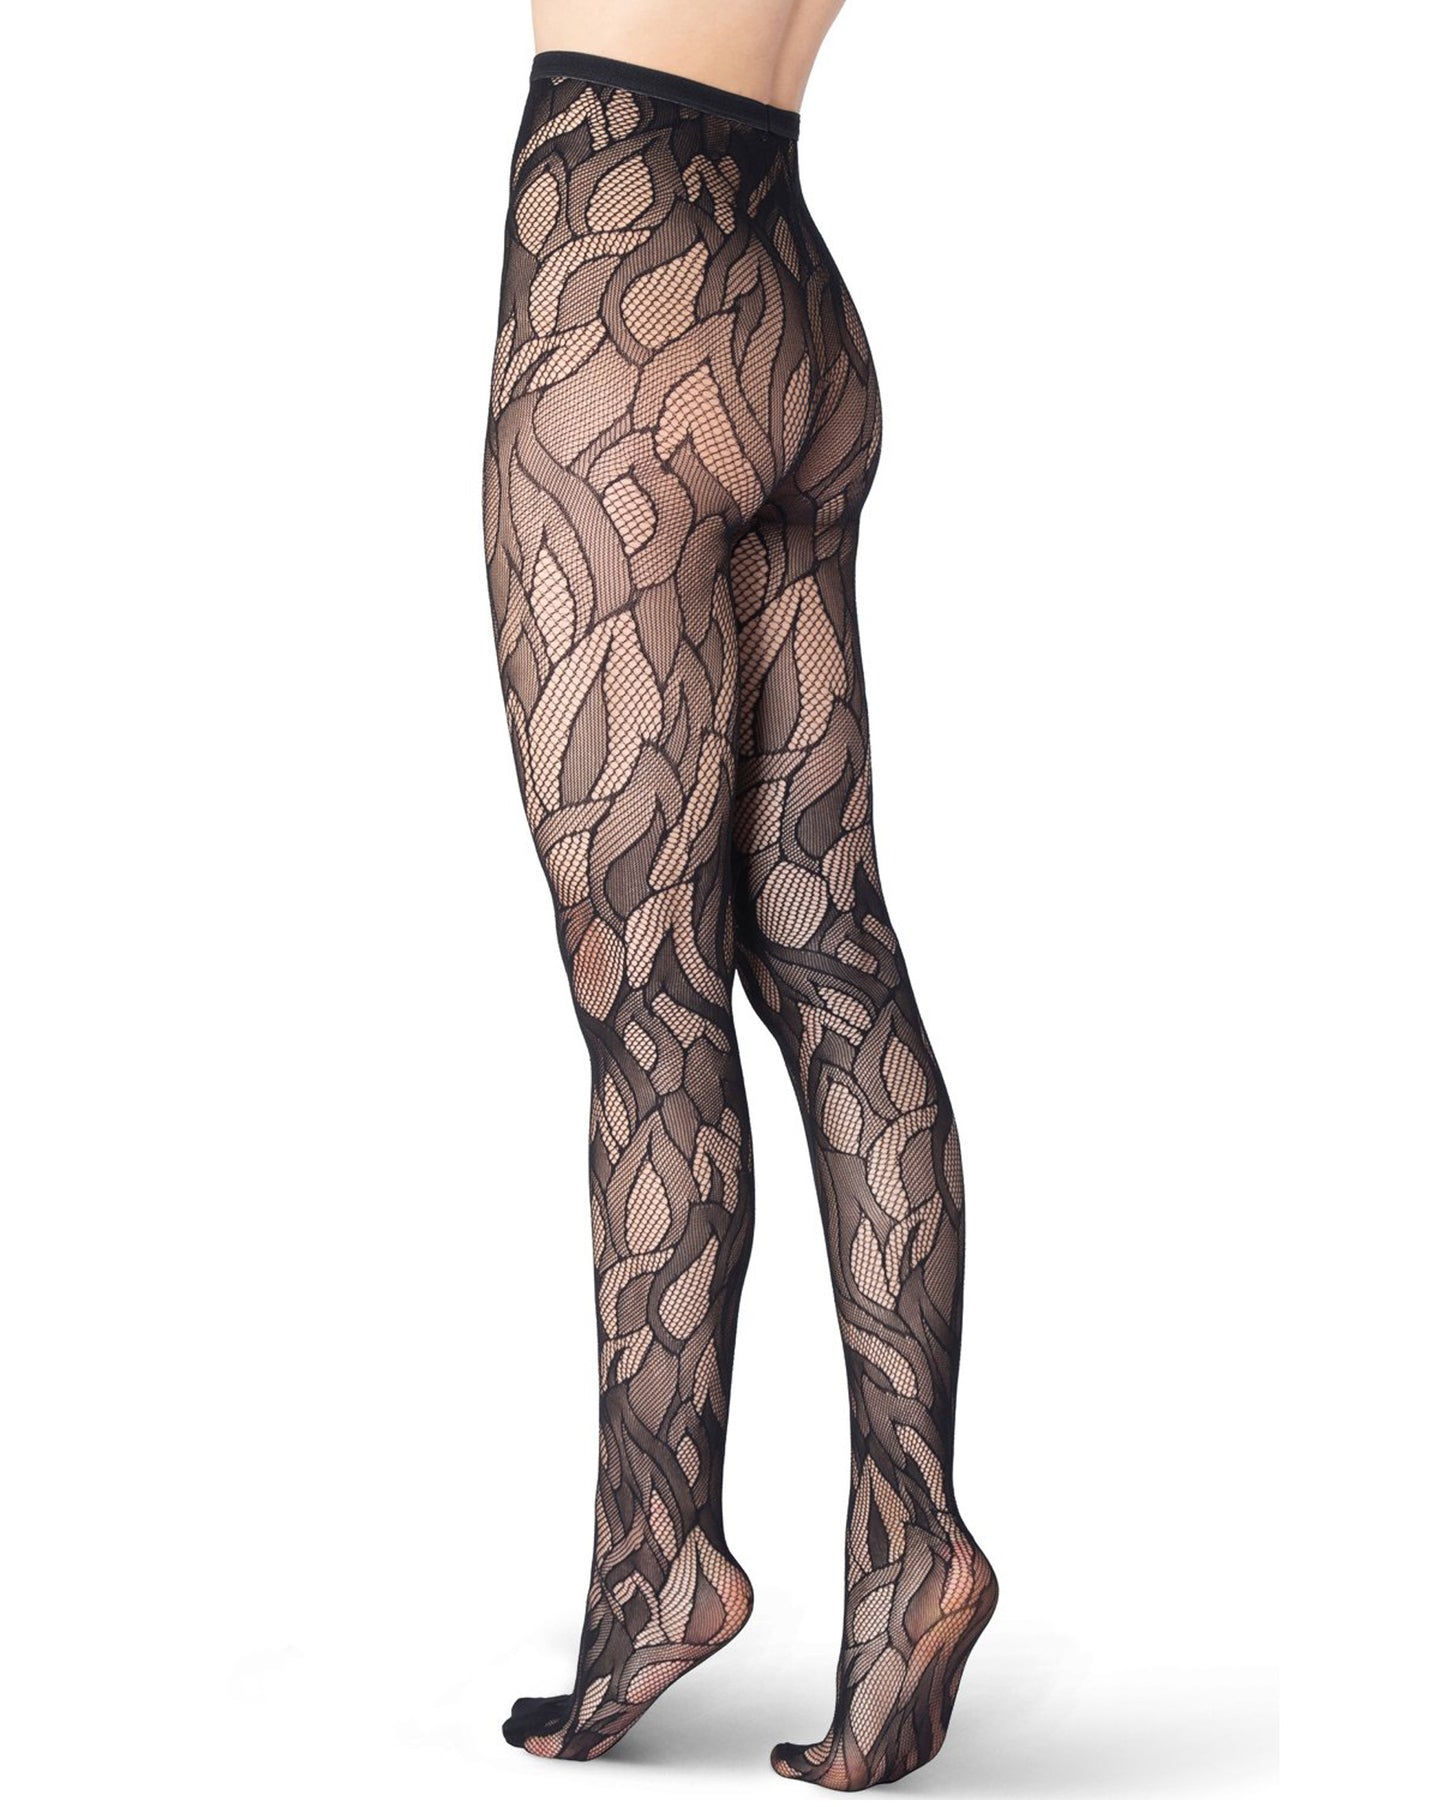 Emilio Cavallini Flames Tights - Black open fishnet tights with a stylised flame pattern, seamless body and micro-mesh toe.